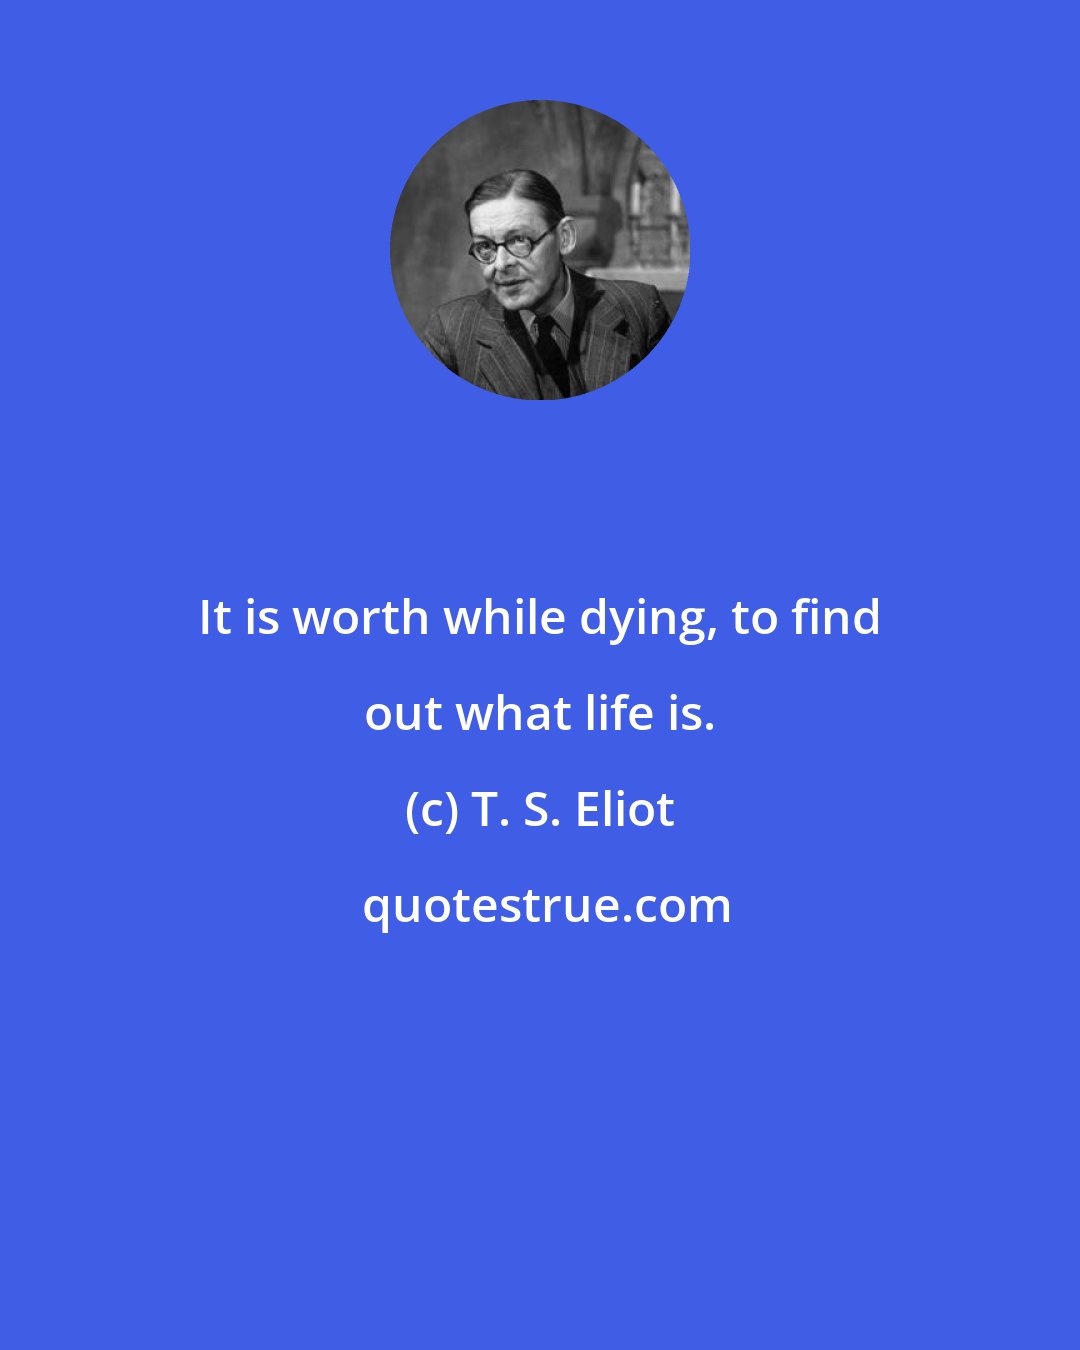 T. S. Eliot: It is worth while dying, to find out what life is.